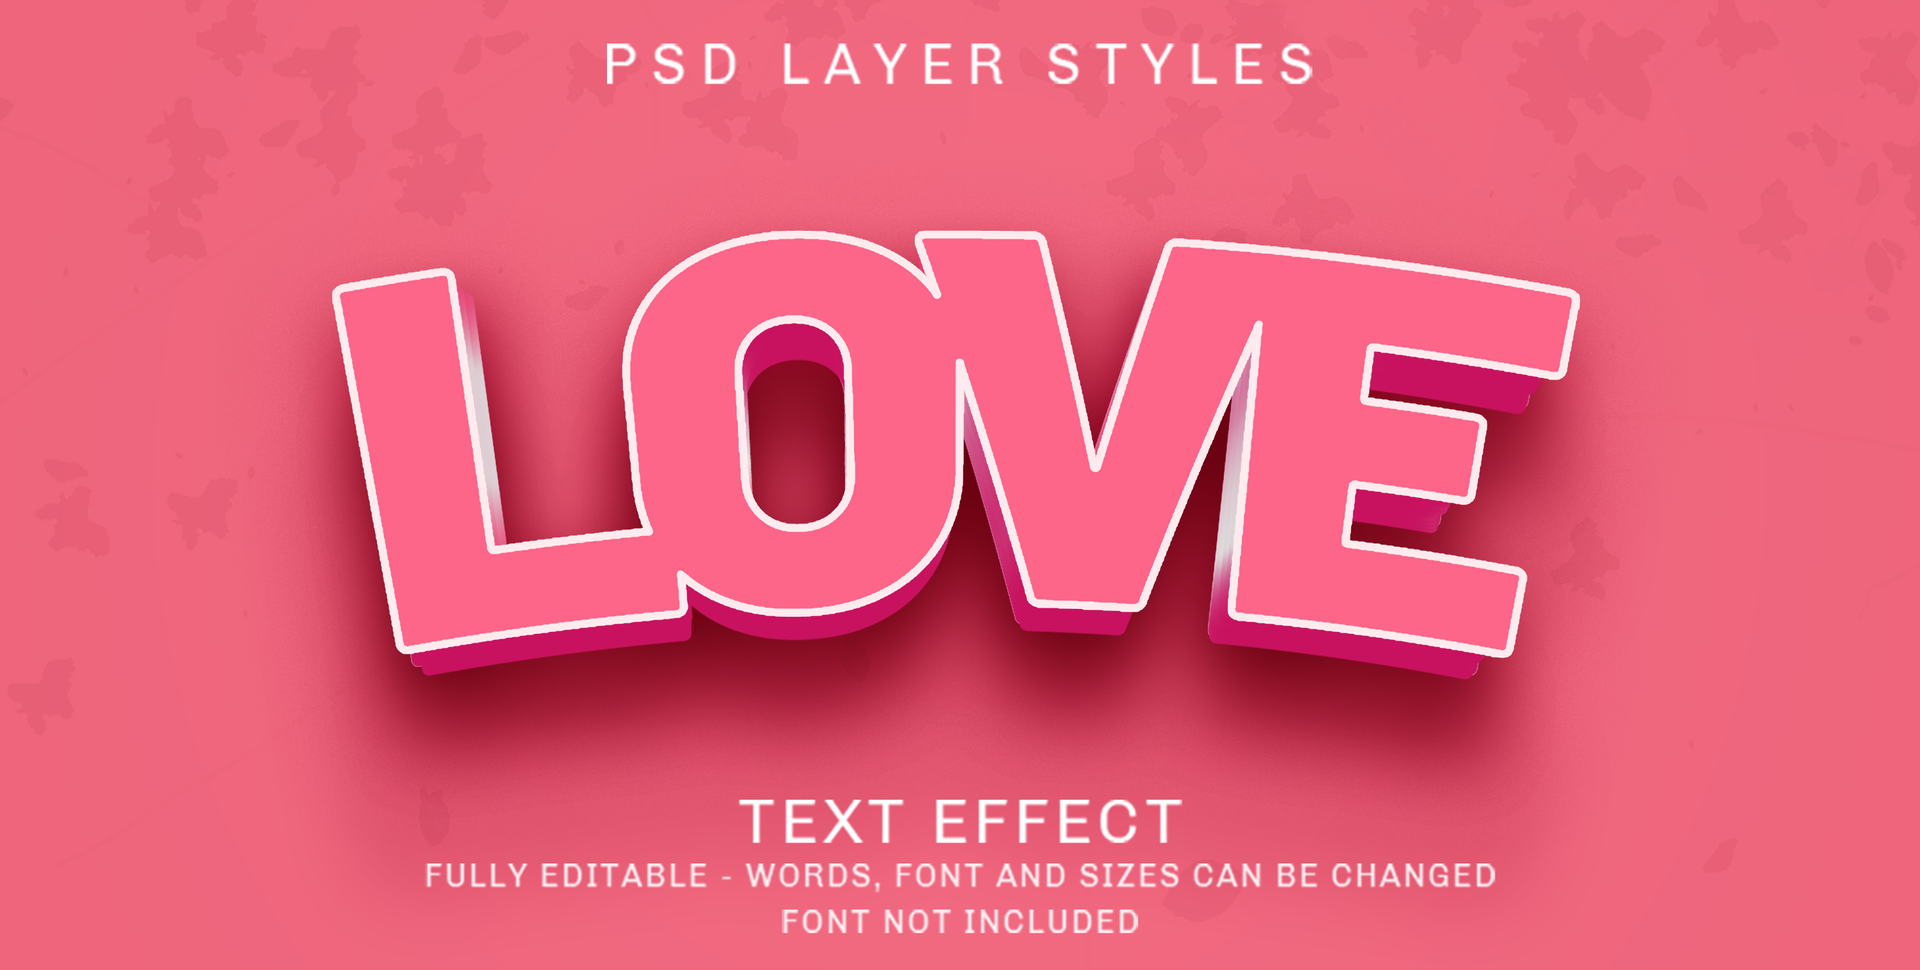 3d solid pink love - editable text style effect psd